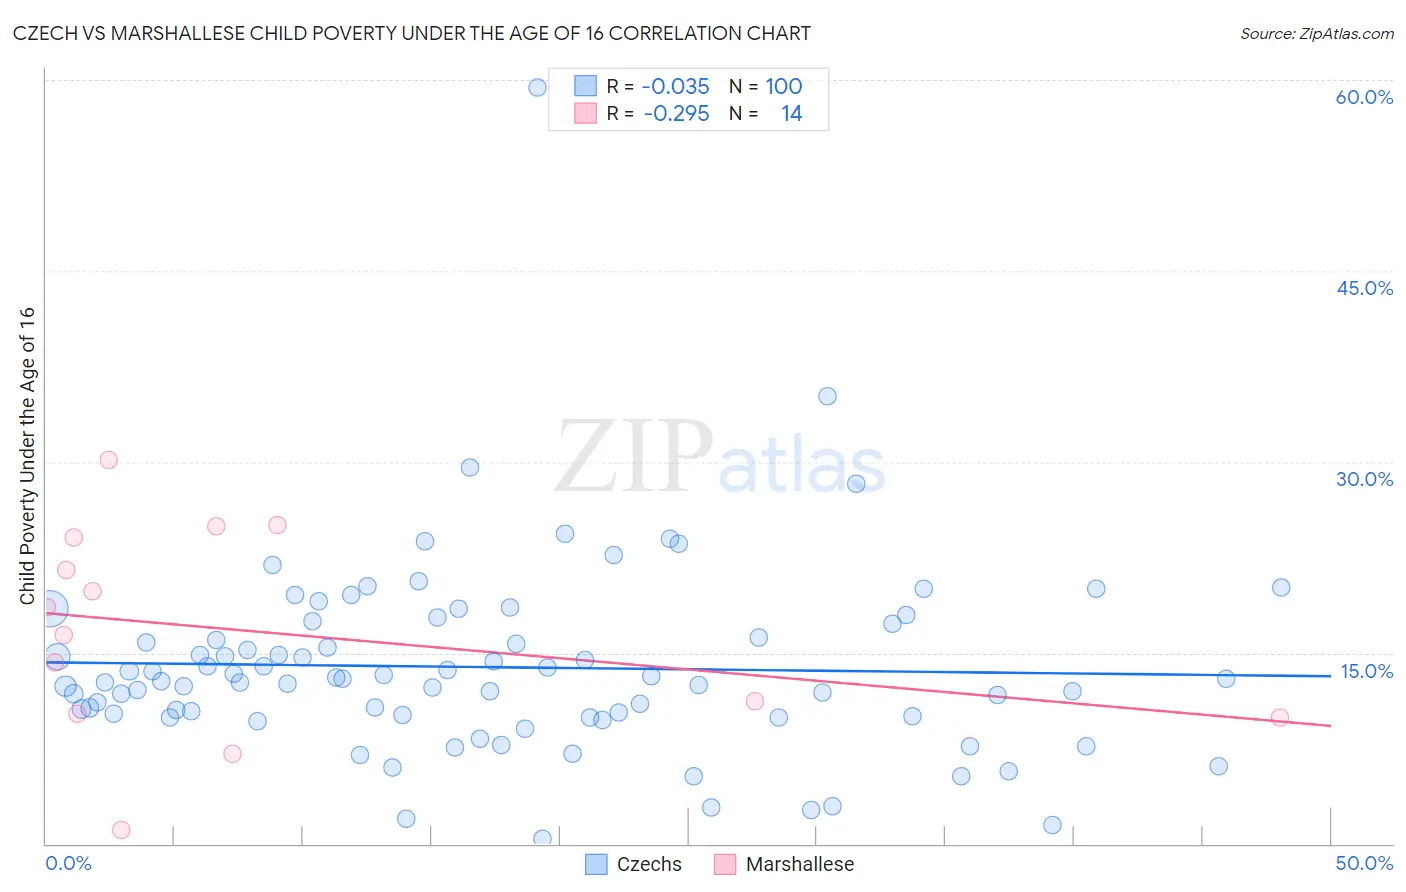 Czech vs Marshallese Child Poverty Under the Age of 16